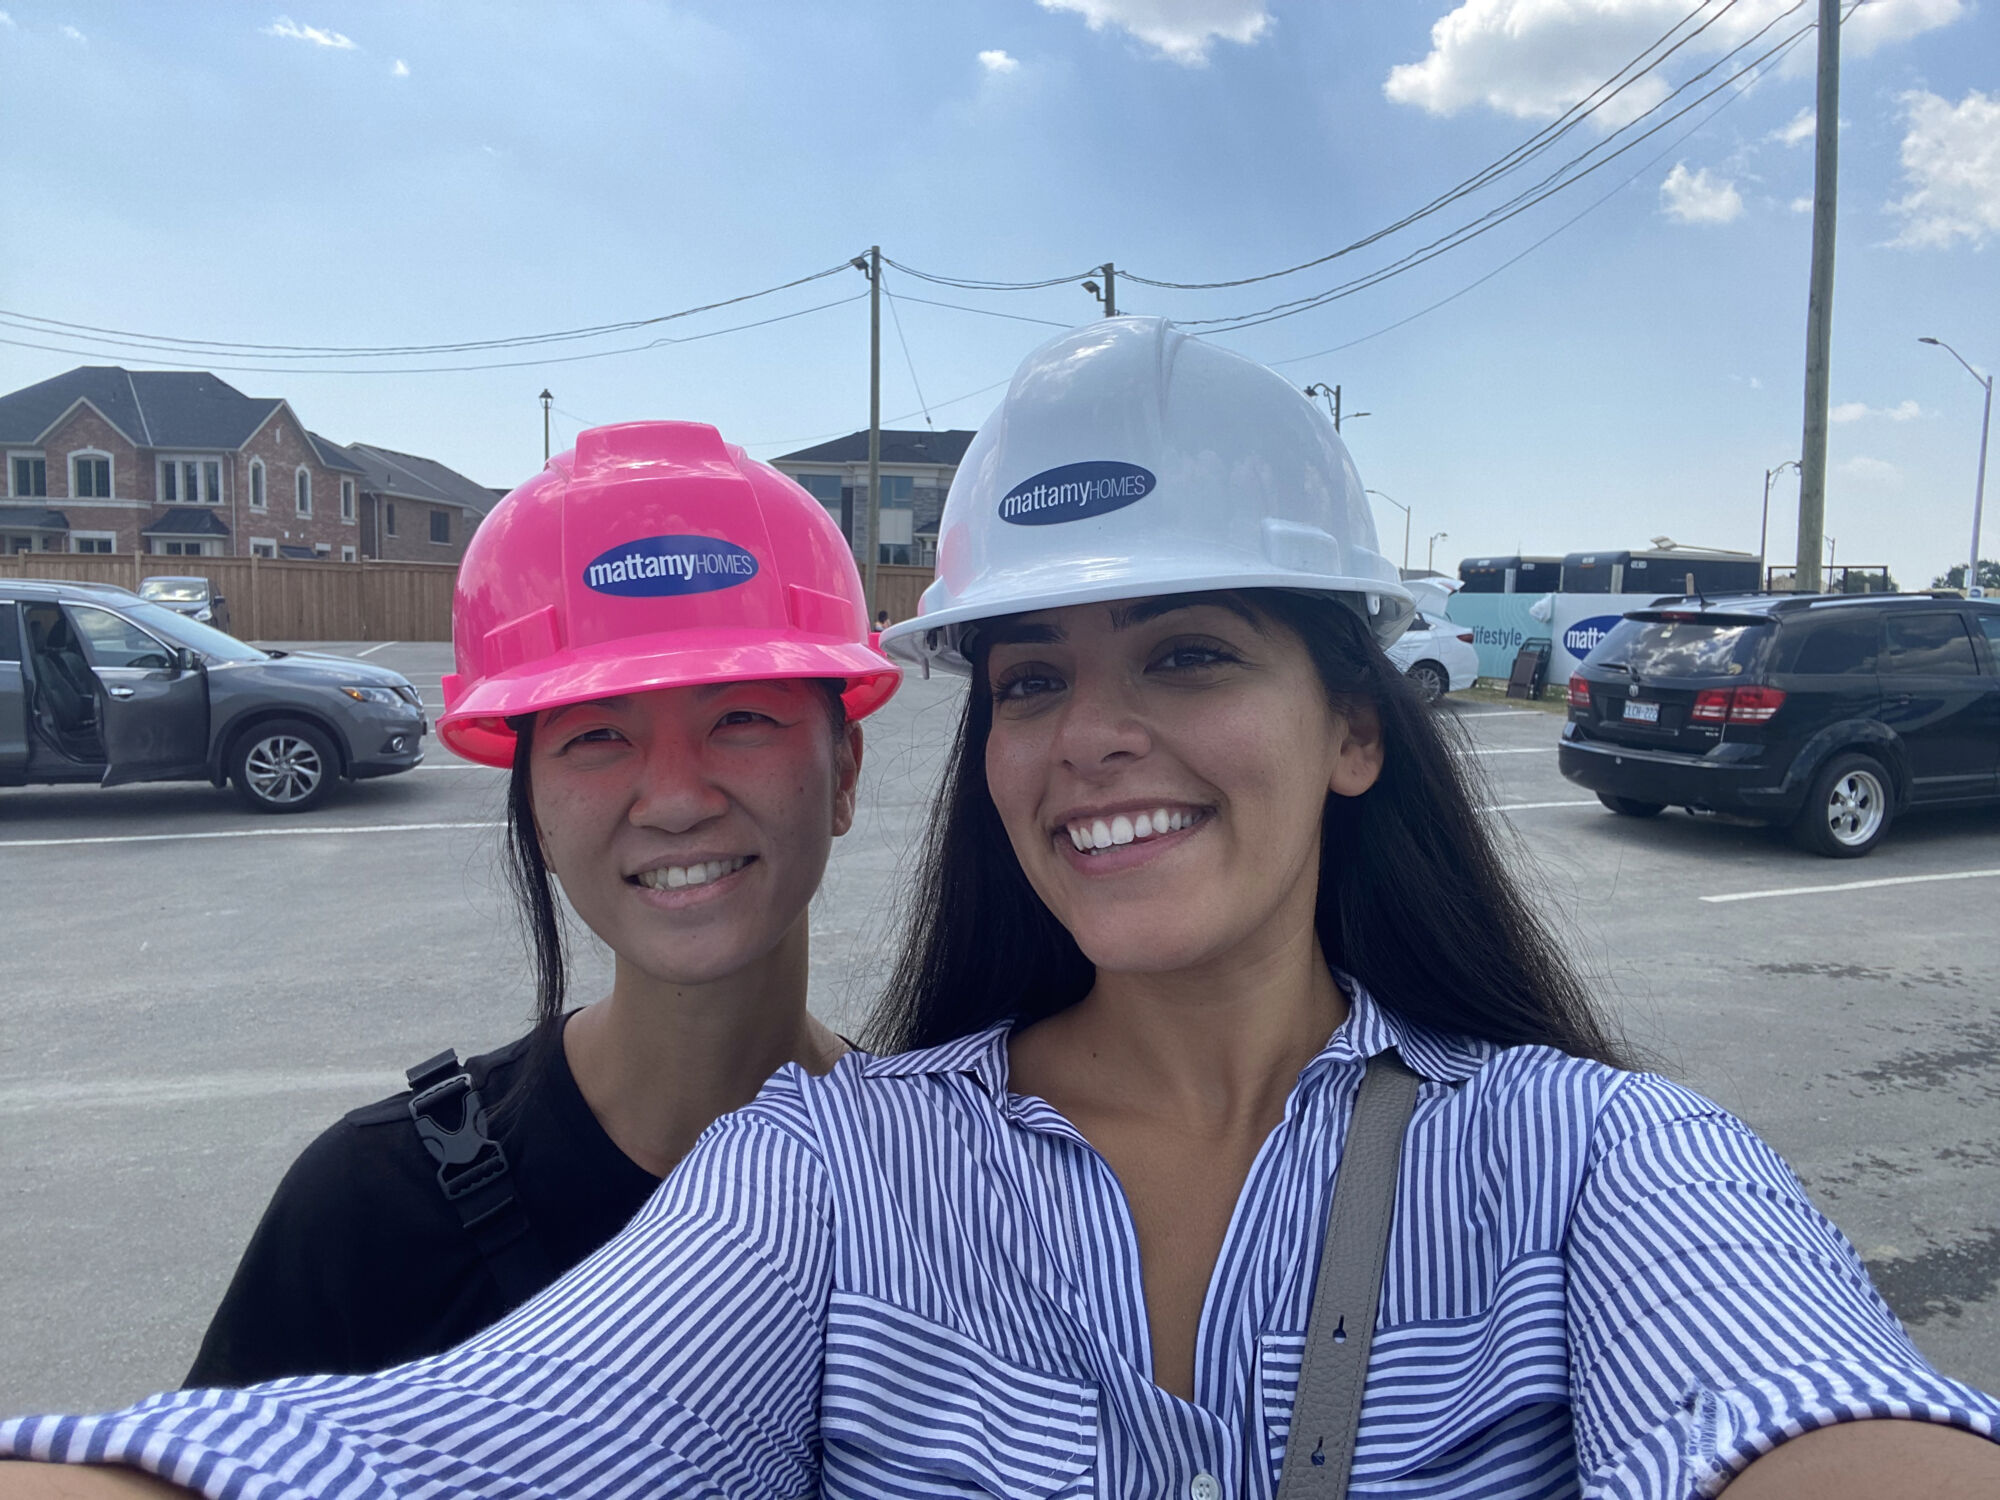 Two woman taking a selfie, each wearing a pink and white hard hat with the Mattamy logo on it. With parked cars and houses in the background.